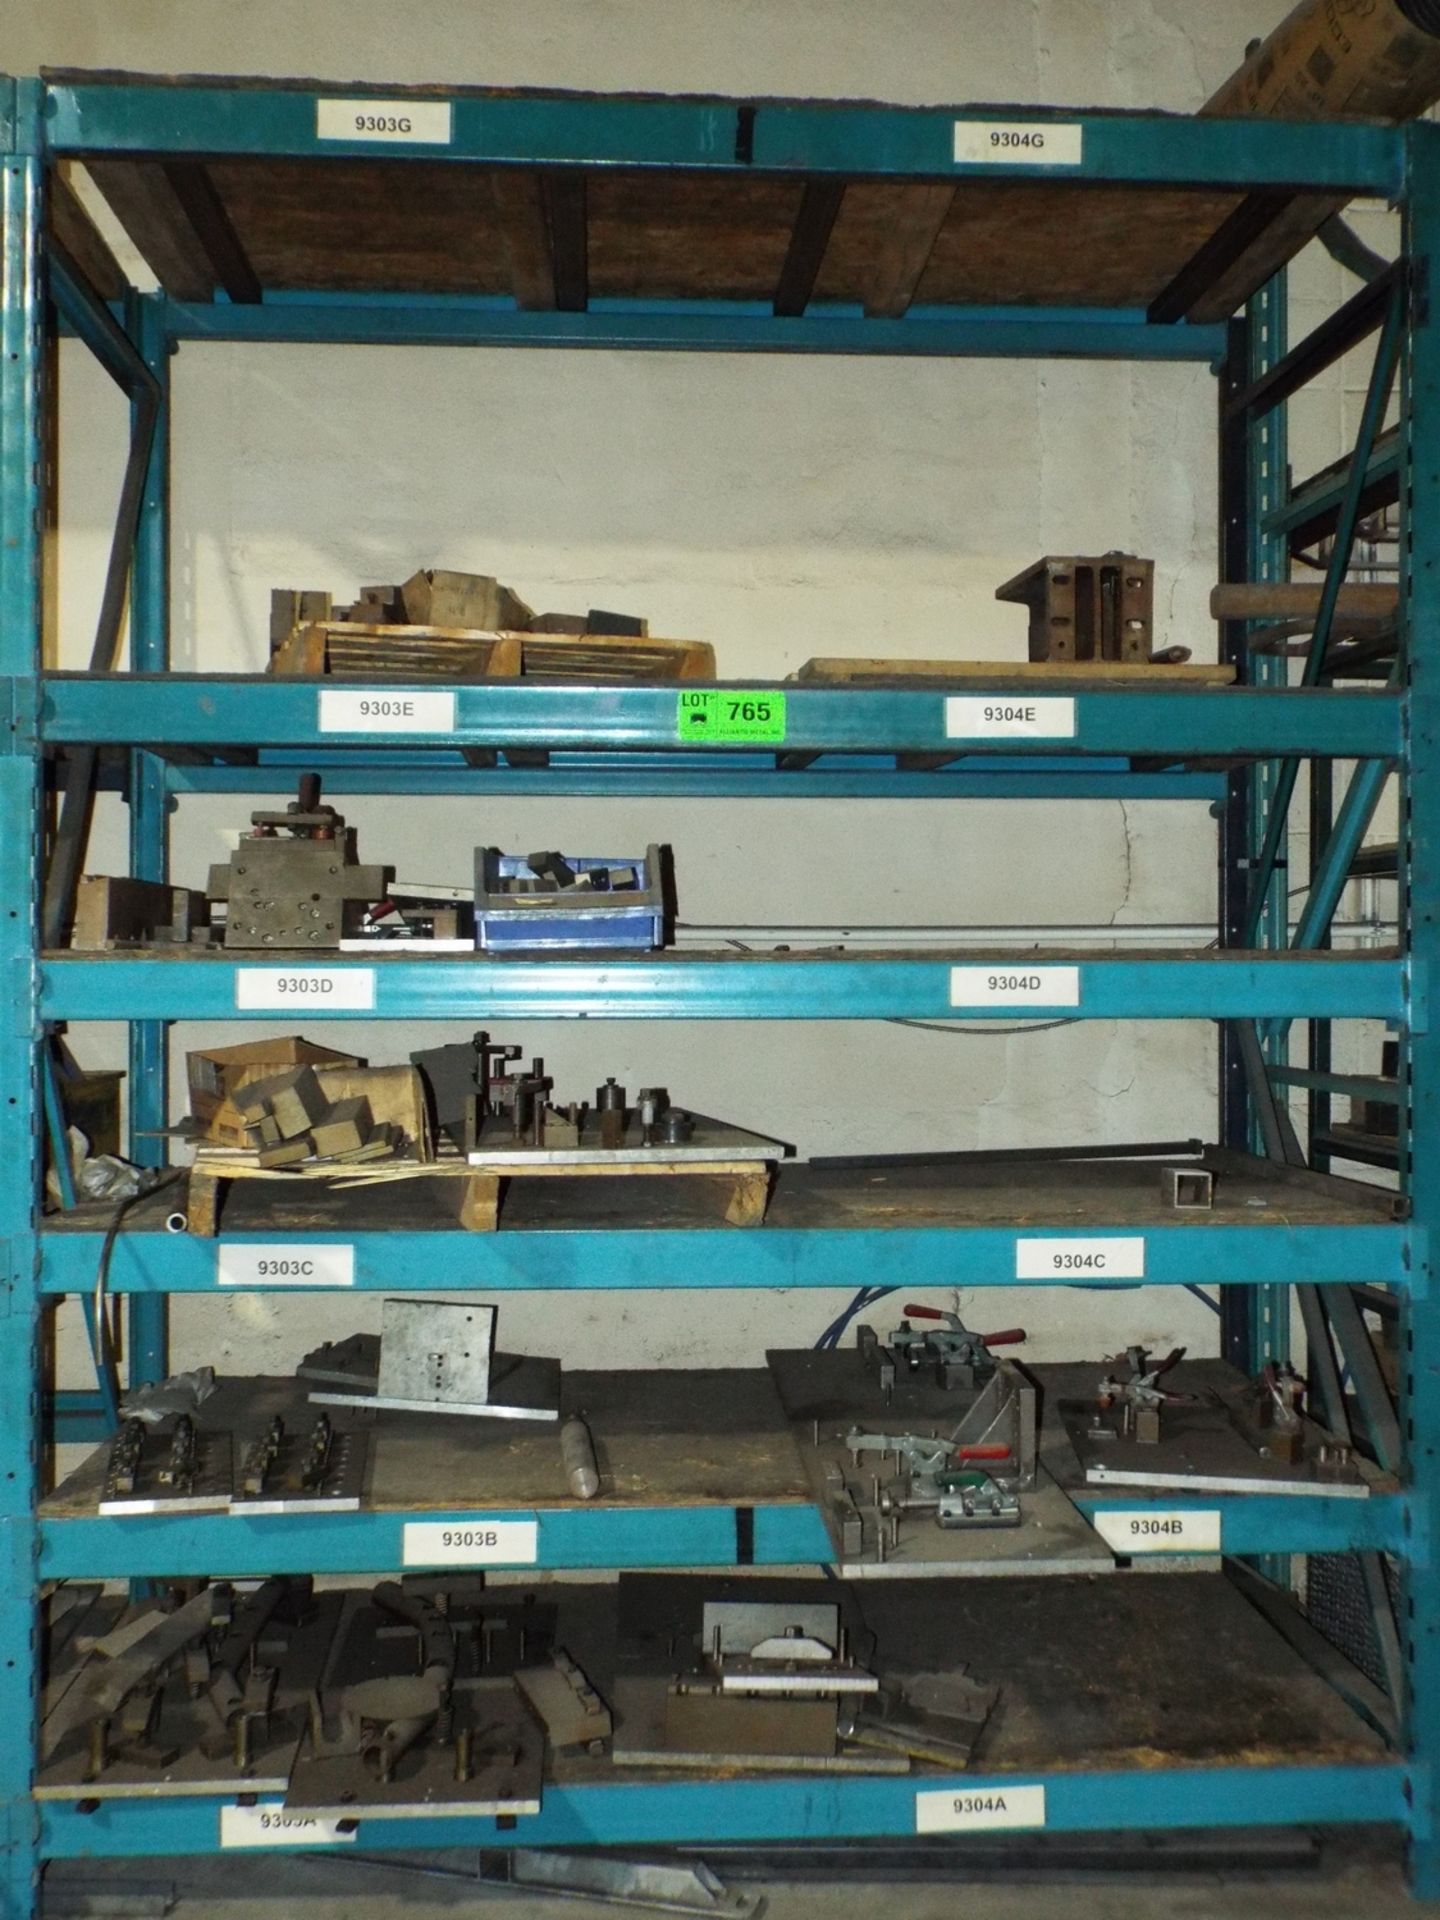 LOT/ CONTENTS OF RACK - FIXTURES AND JIGS